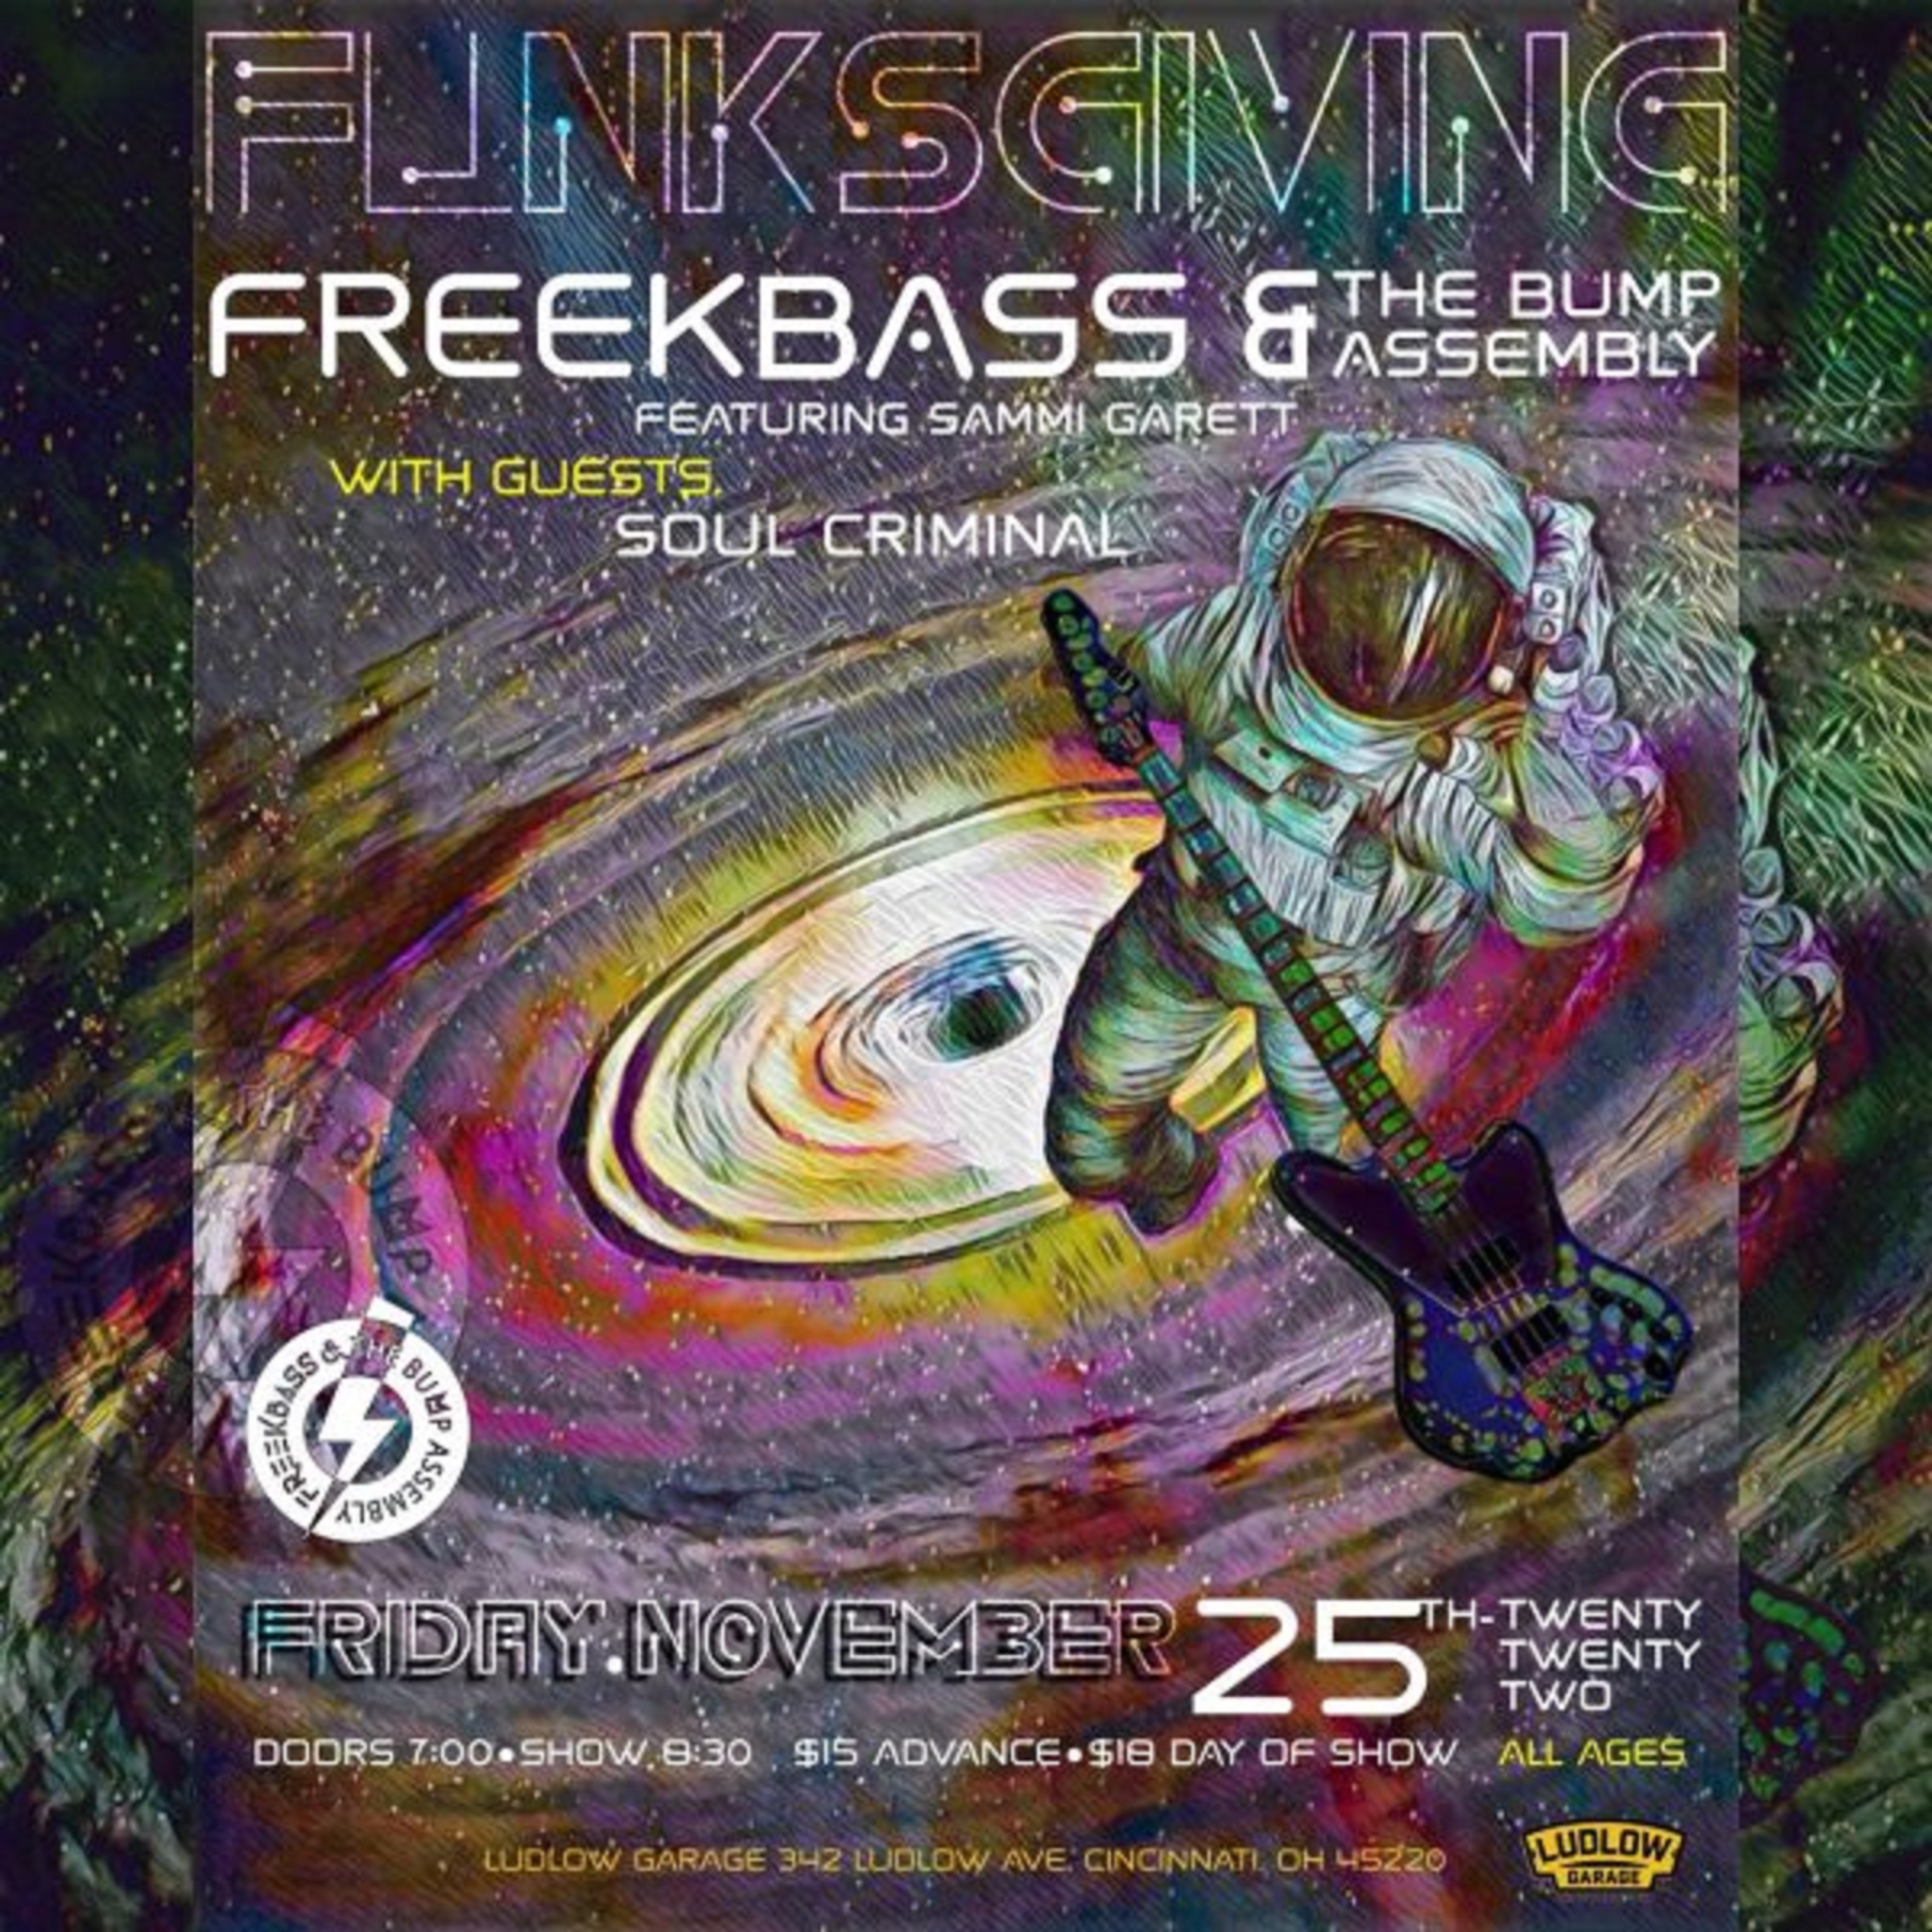 FREEKBASS & THE BUMP ASSEMBLY ANNOUNCE The Annual FunksGiving Show